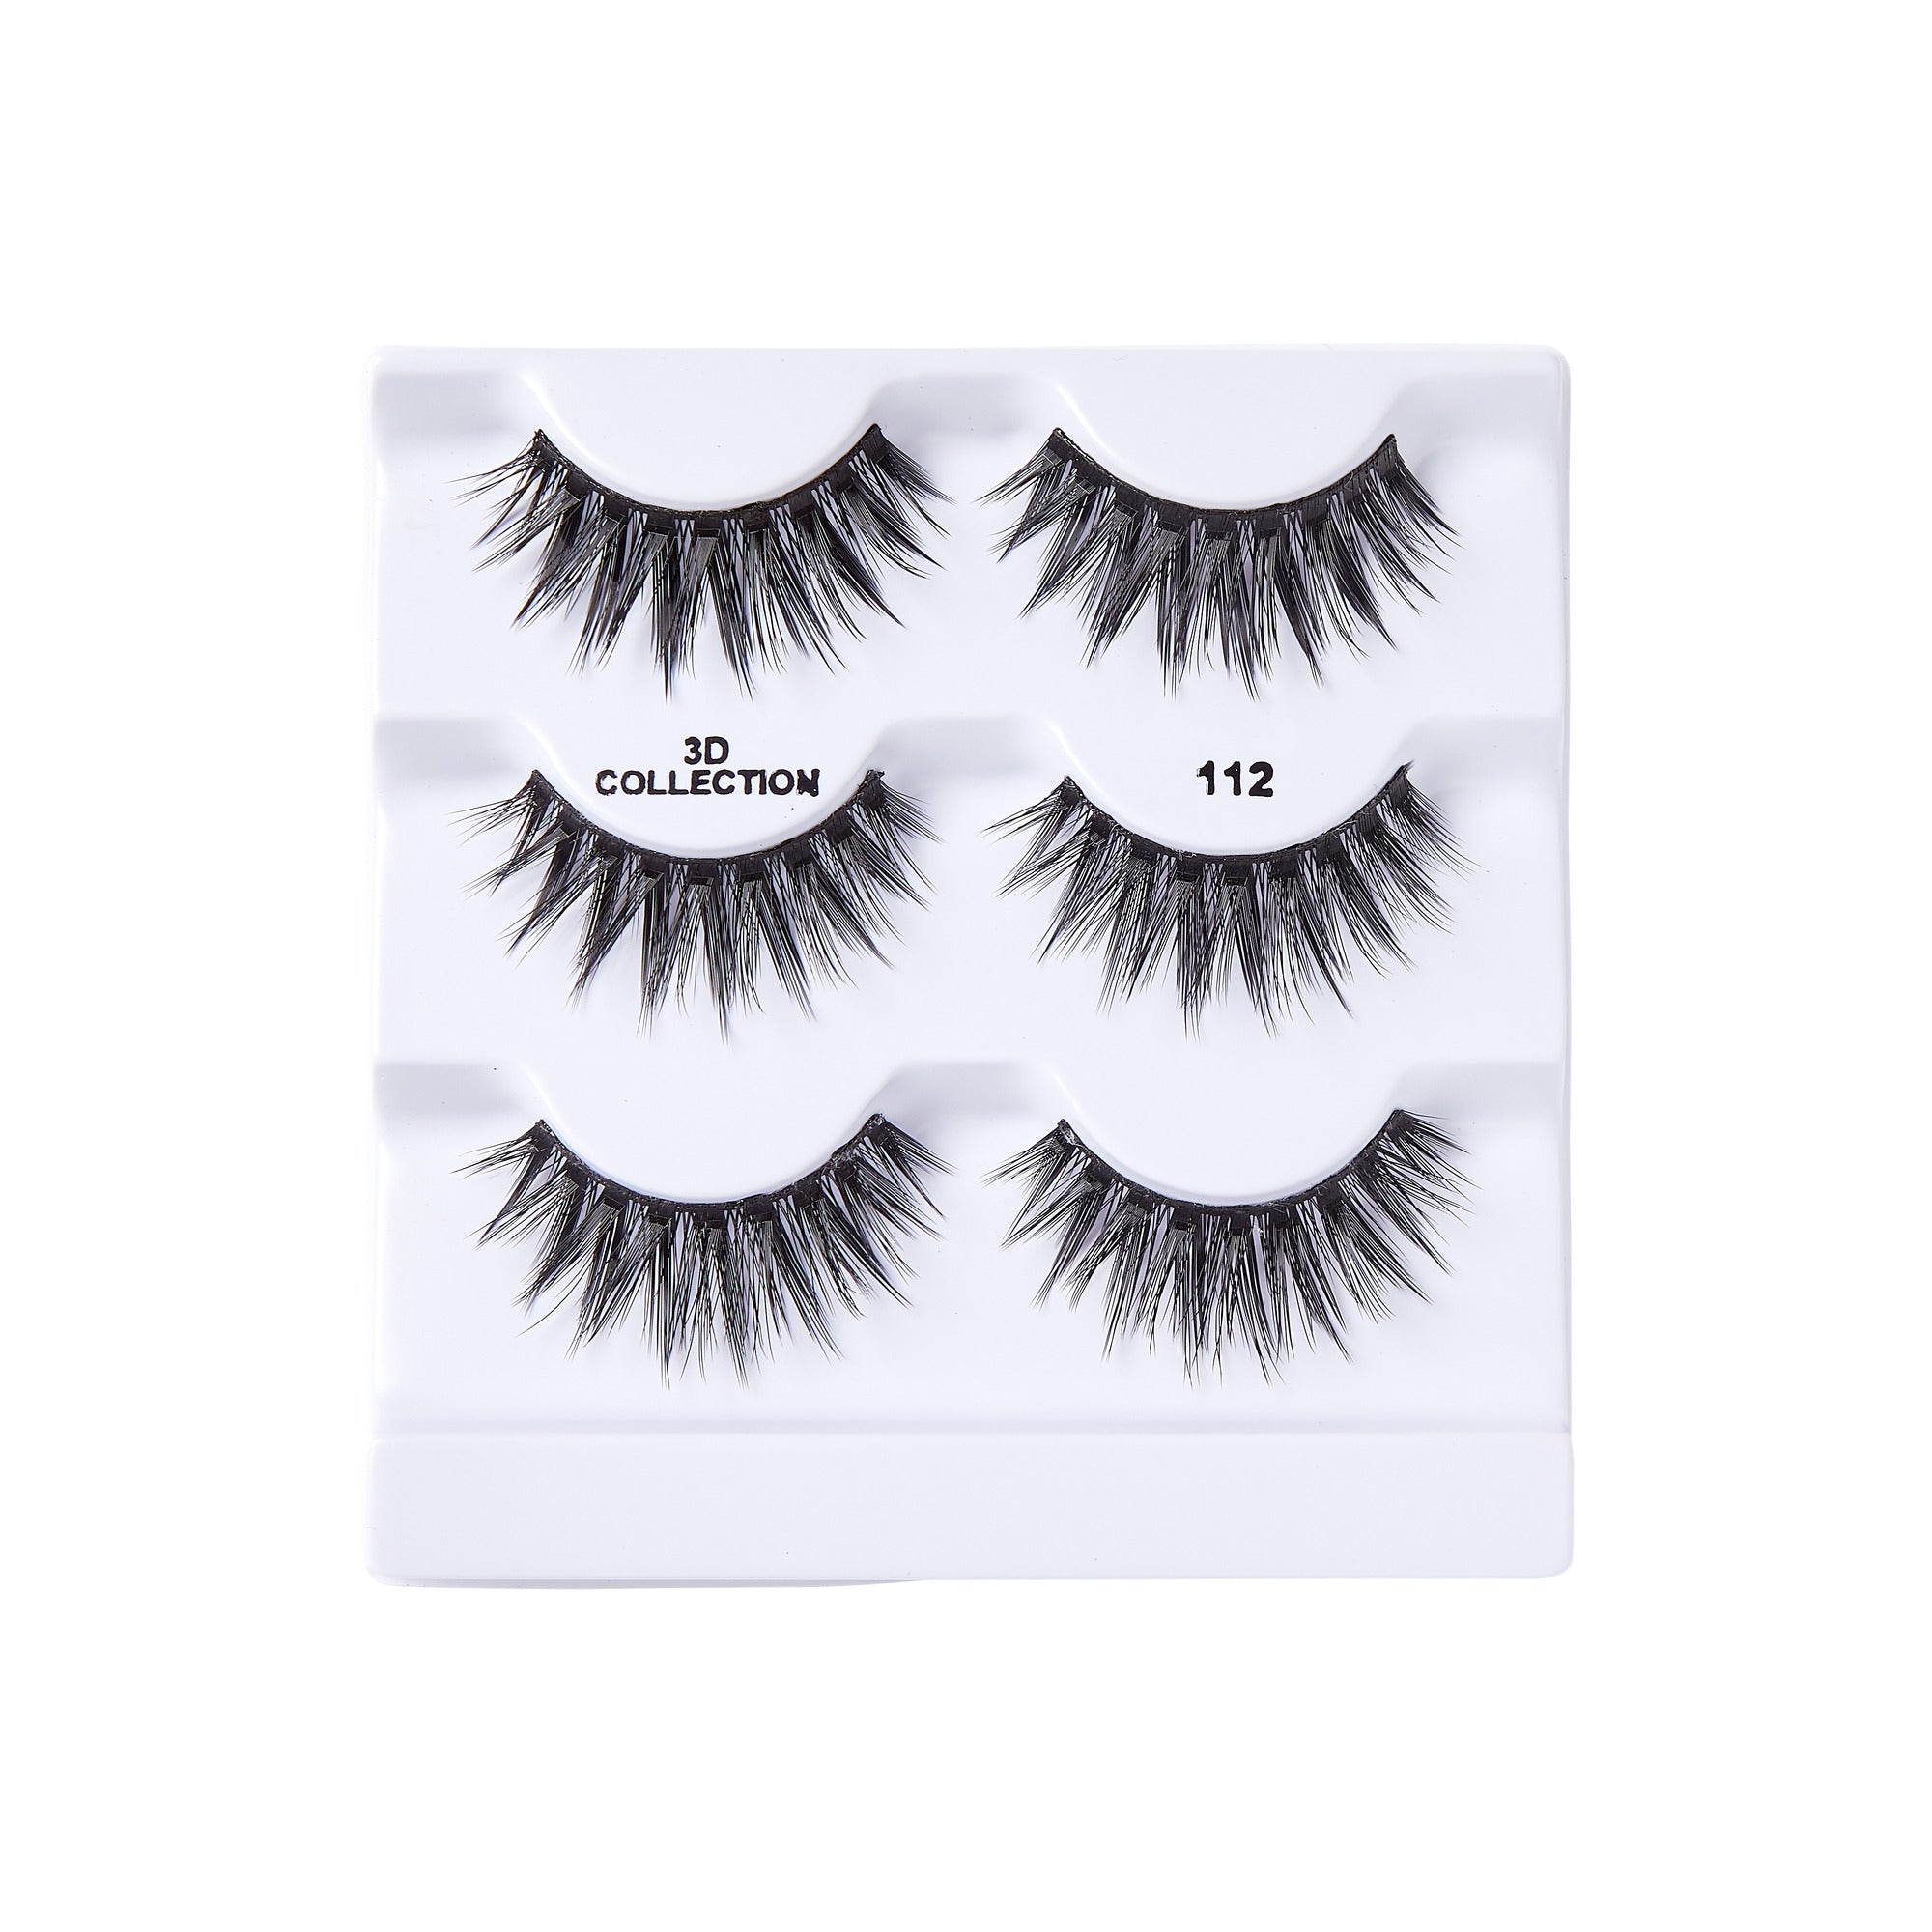 I.Envy By Kiss 3D Lashes Multi Pack Multiangle & Volume Collection-112 (KPEIM112)